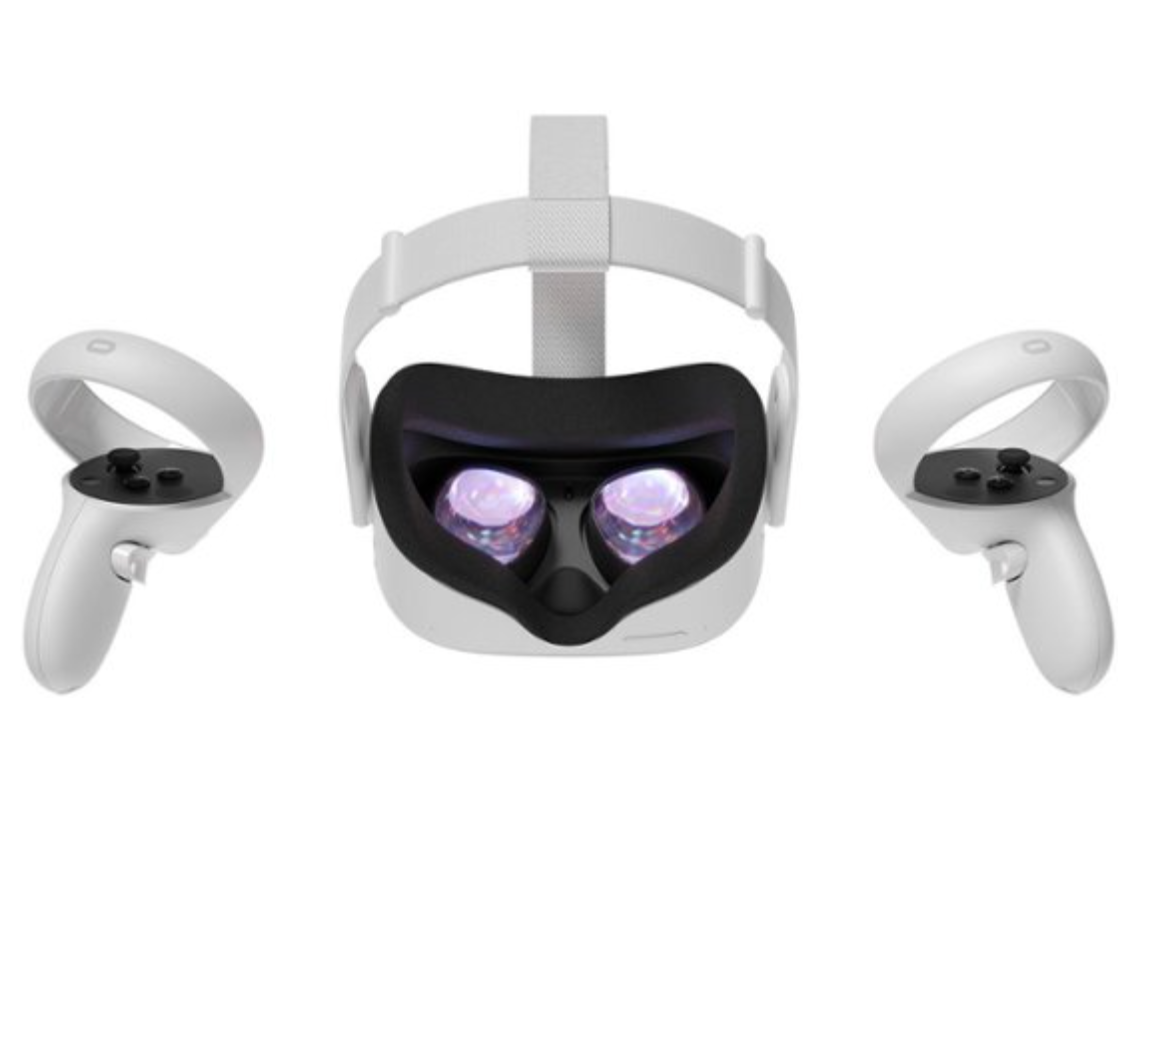 OCULUS – QUEST 2 – ADVANCED ALL-IN-ONE VIRTUAL REALITY HEADSET-256GB